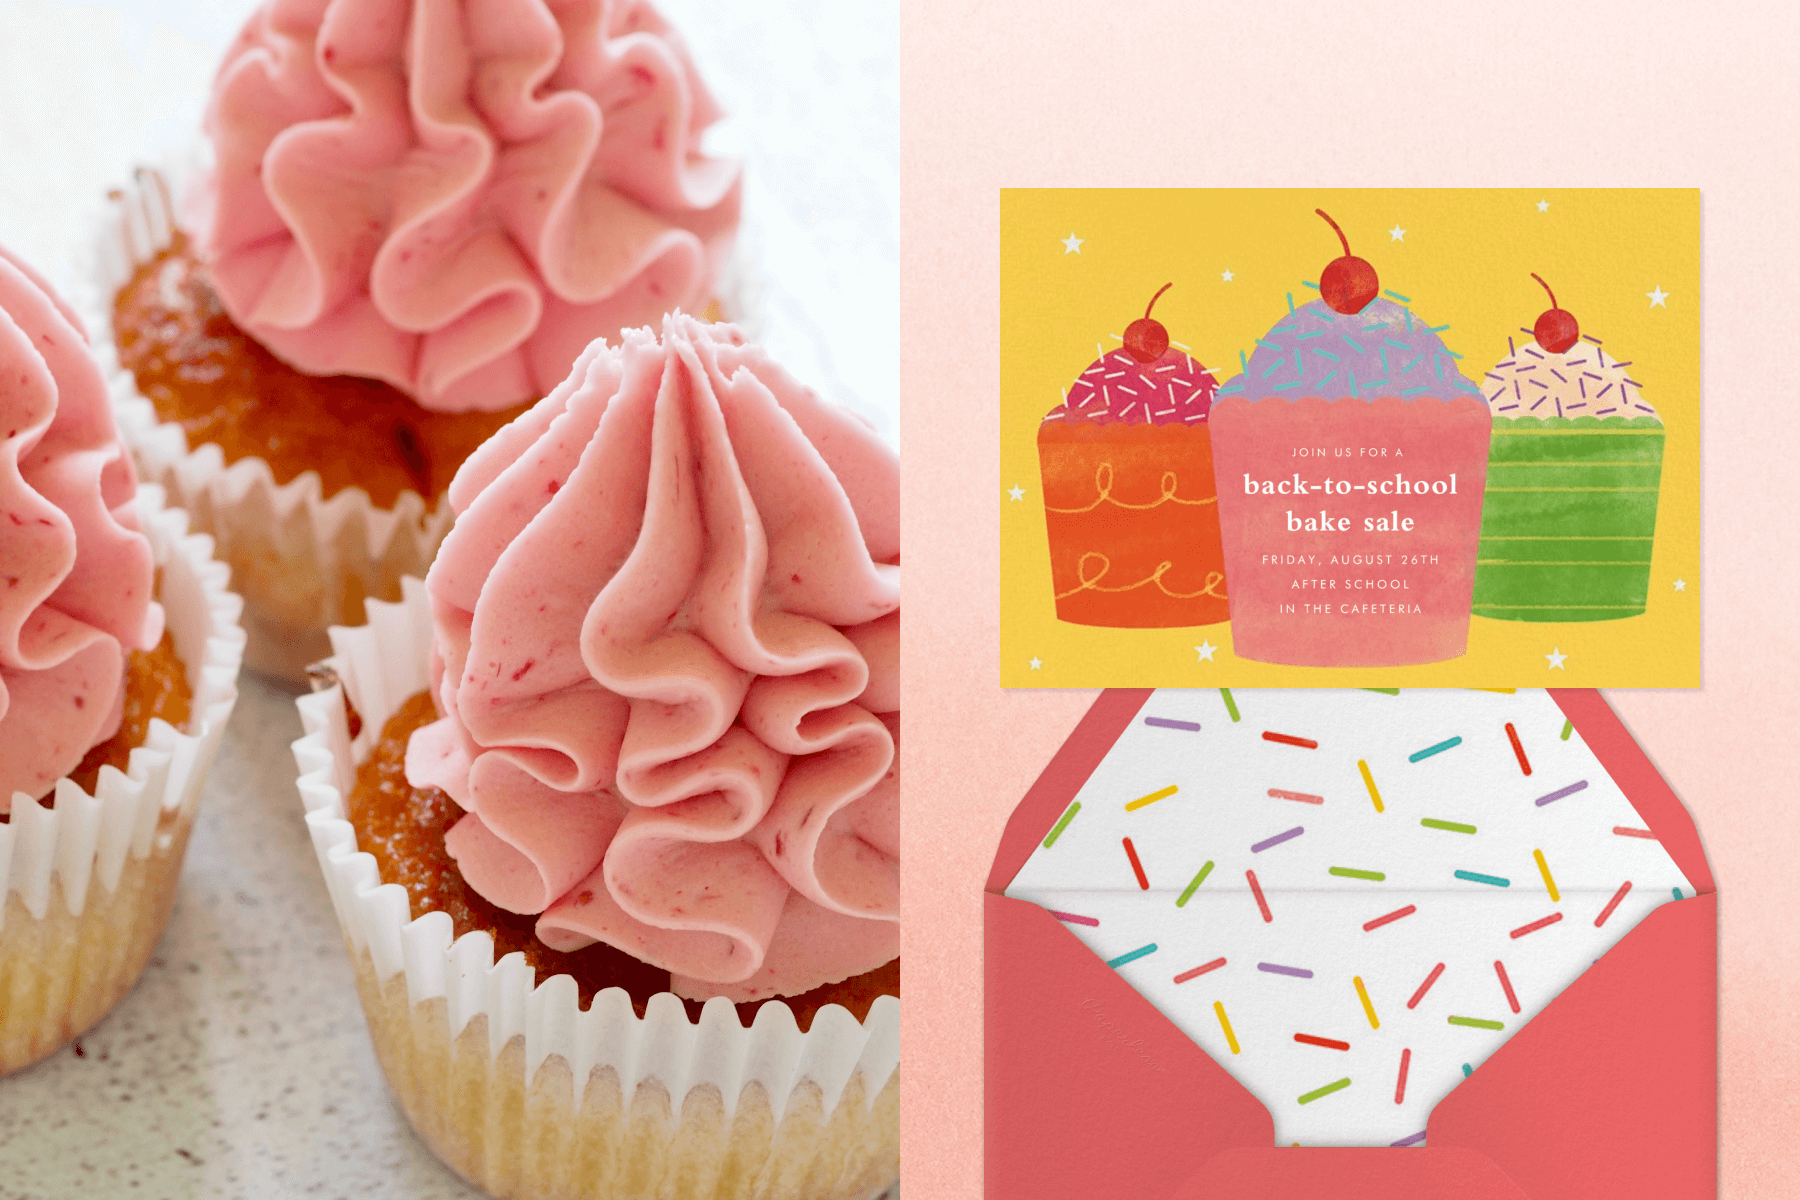 Left: Three cupcakes with pink frosting. Right: A yellow invitation for a back-to-school bake sale with three colorful illustrated cupcakes and a red envelope with a liner of sprinkles.